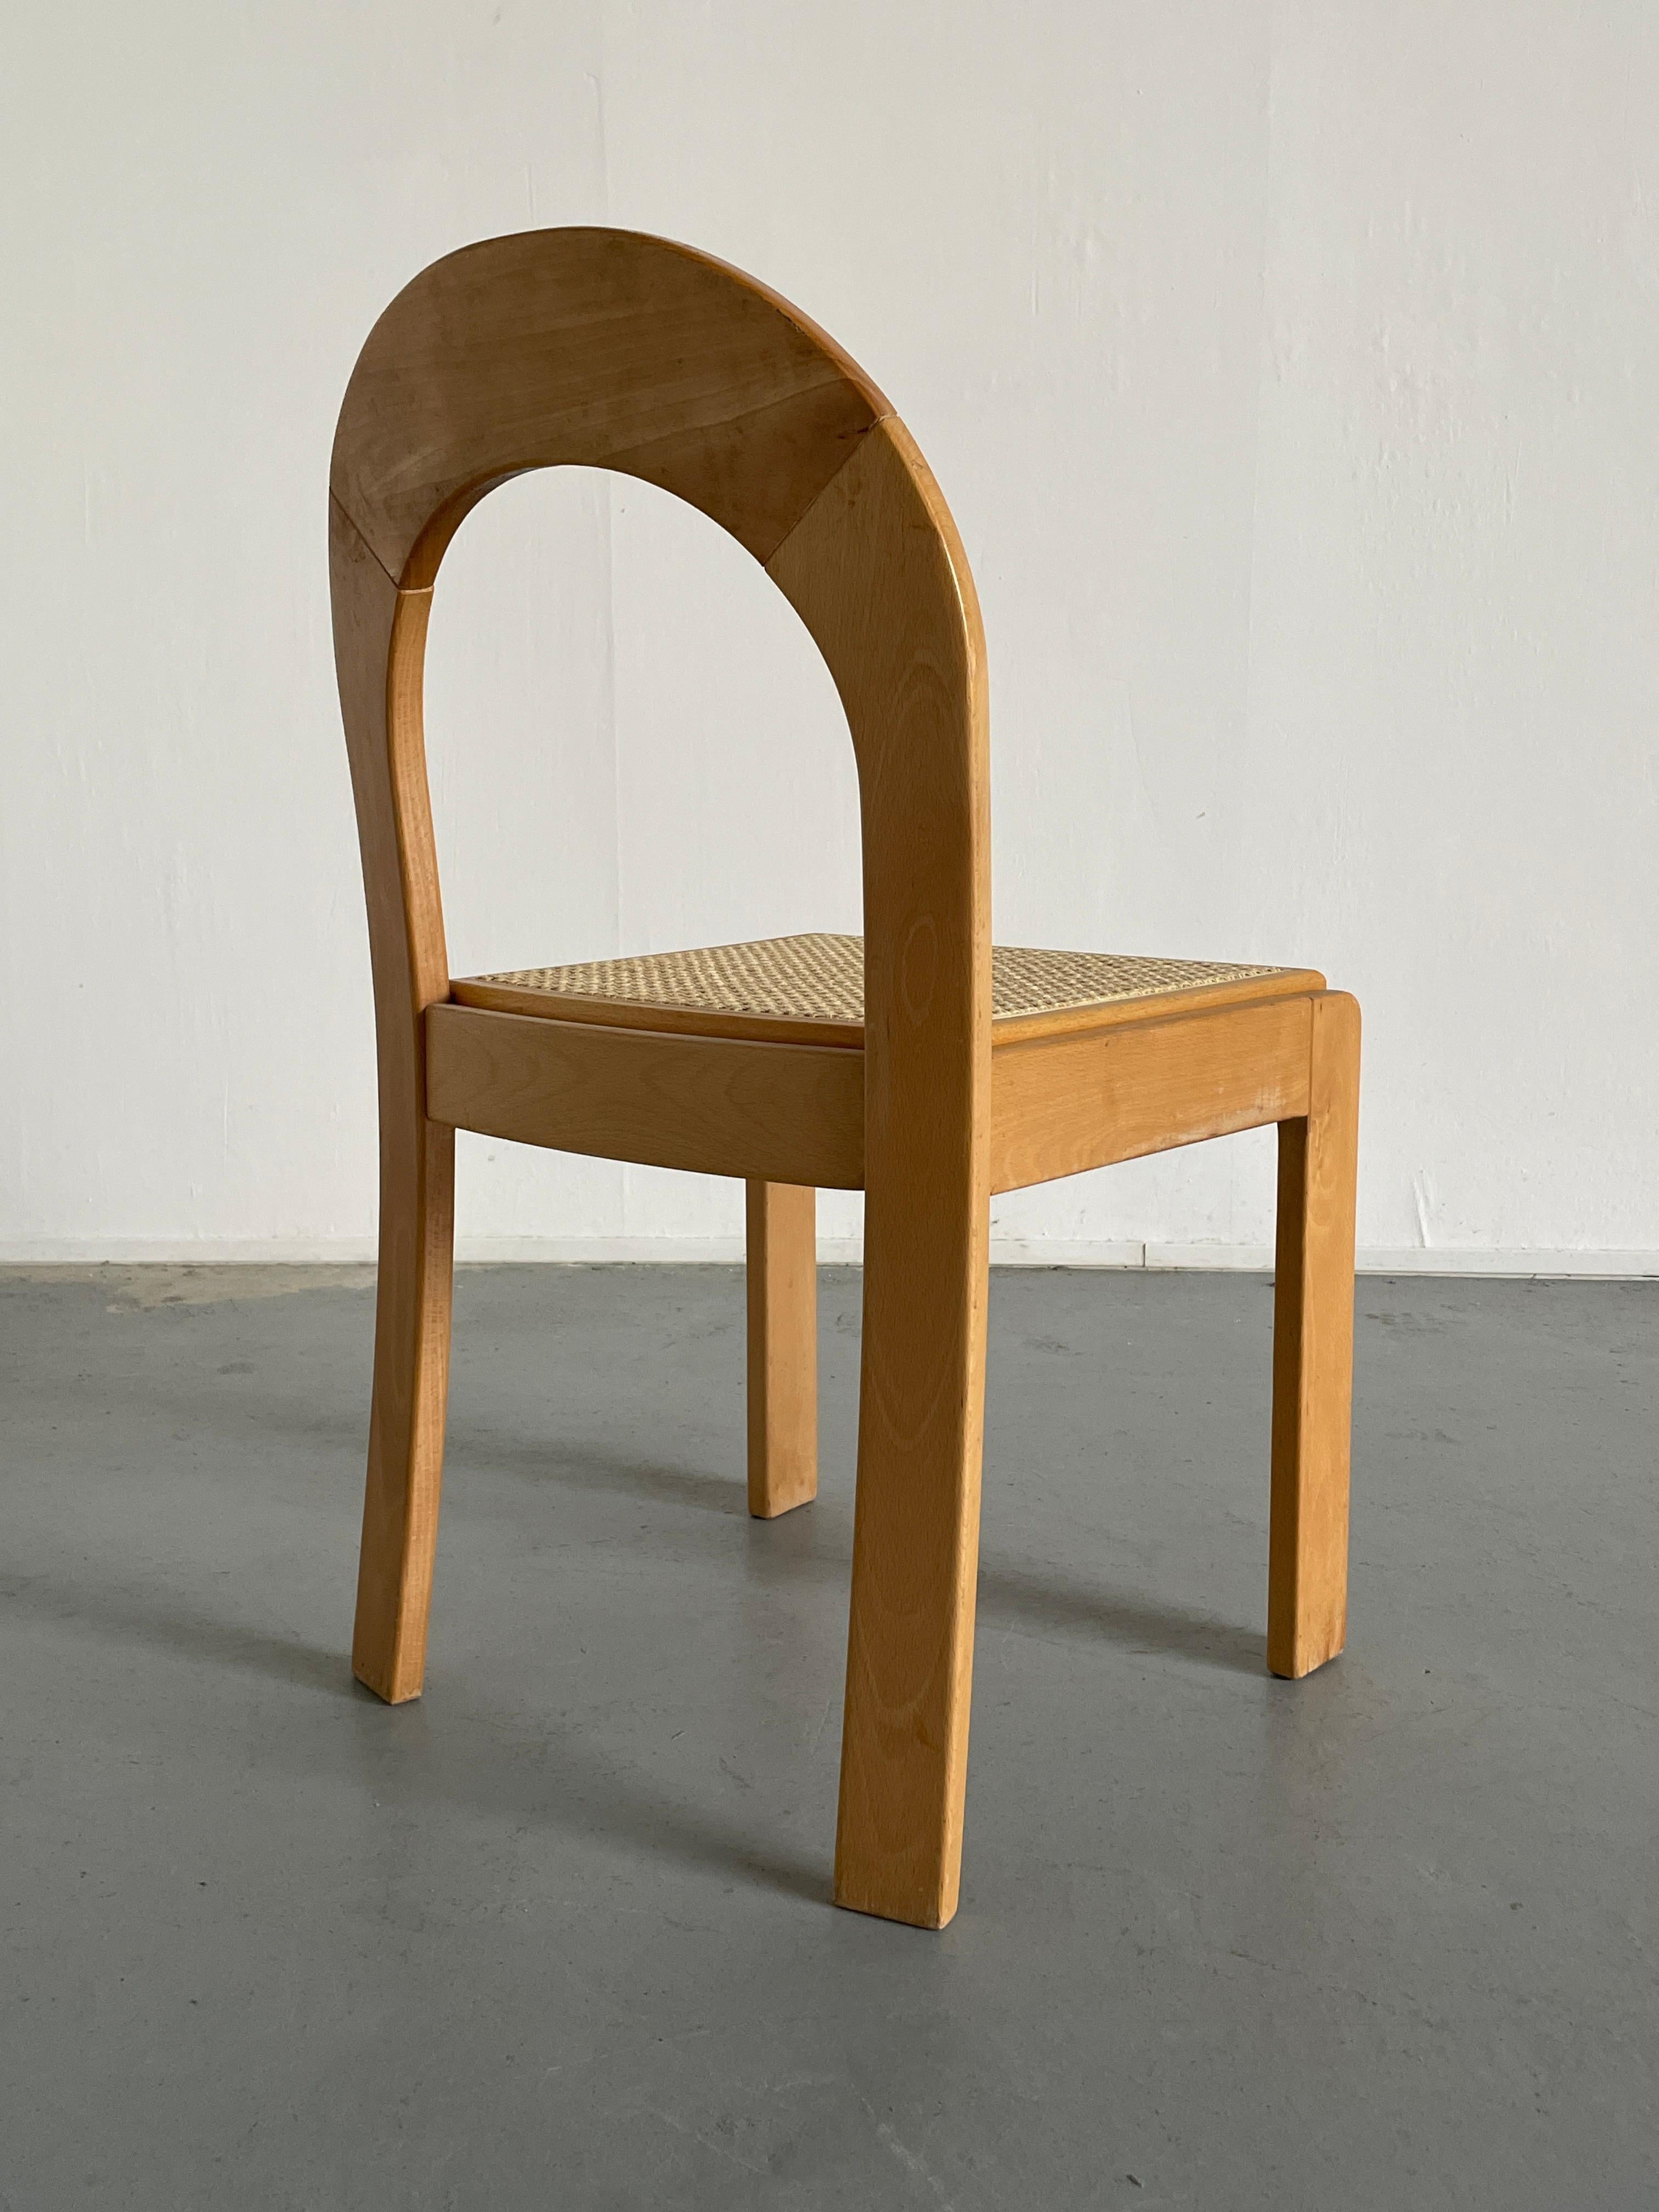 1 of 3 Vintage Dining Chairs Attributed to Tagliabue di Cascina Armata, 1974 3